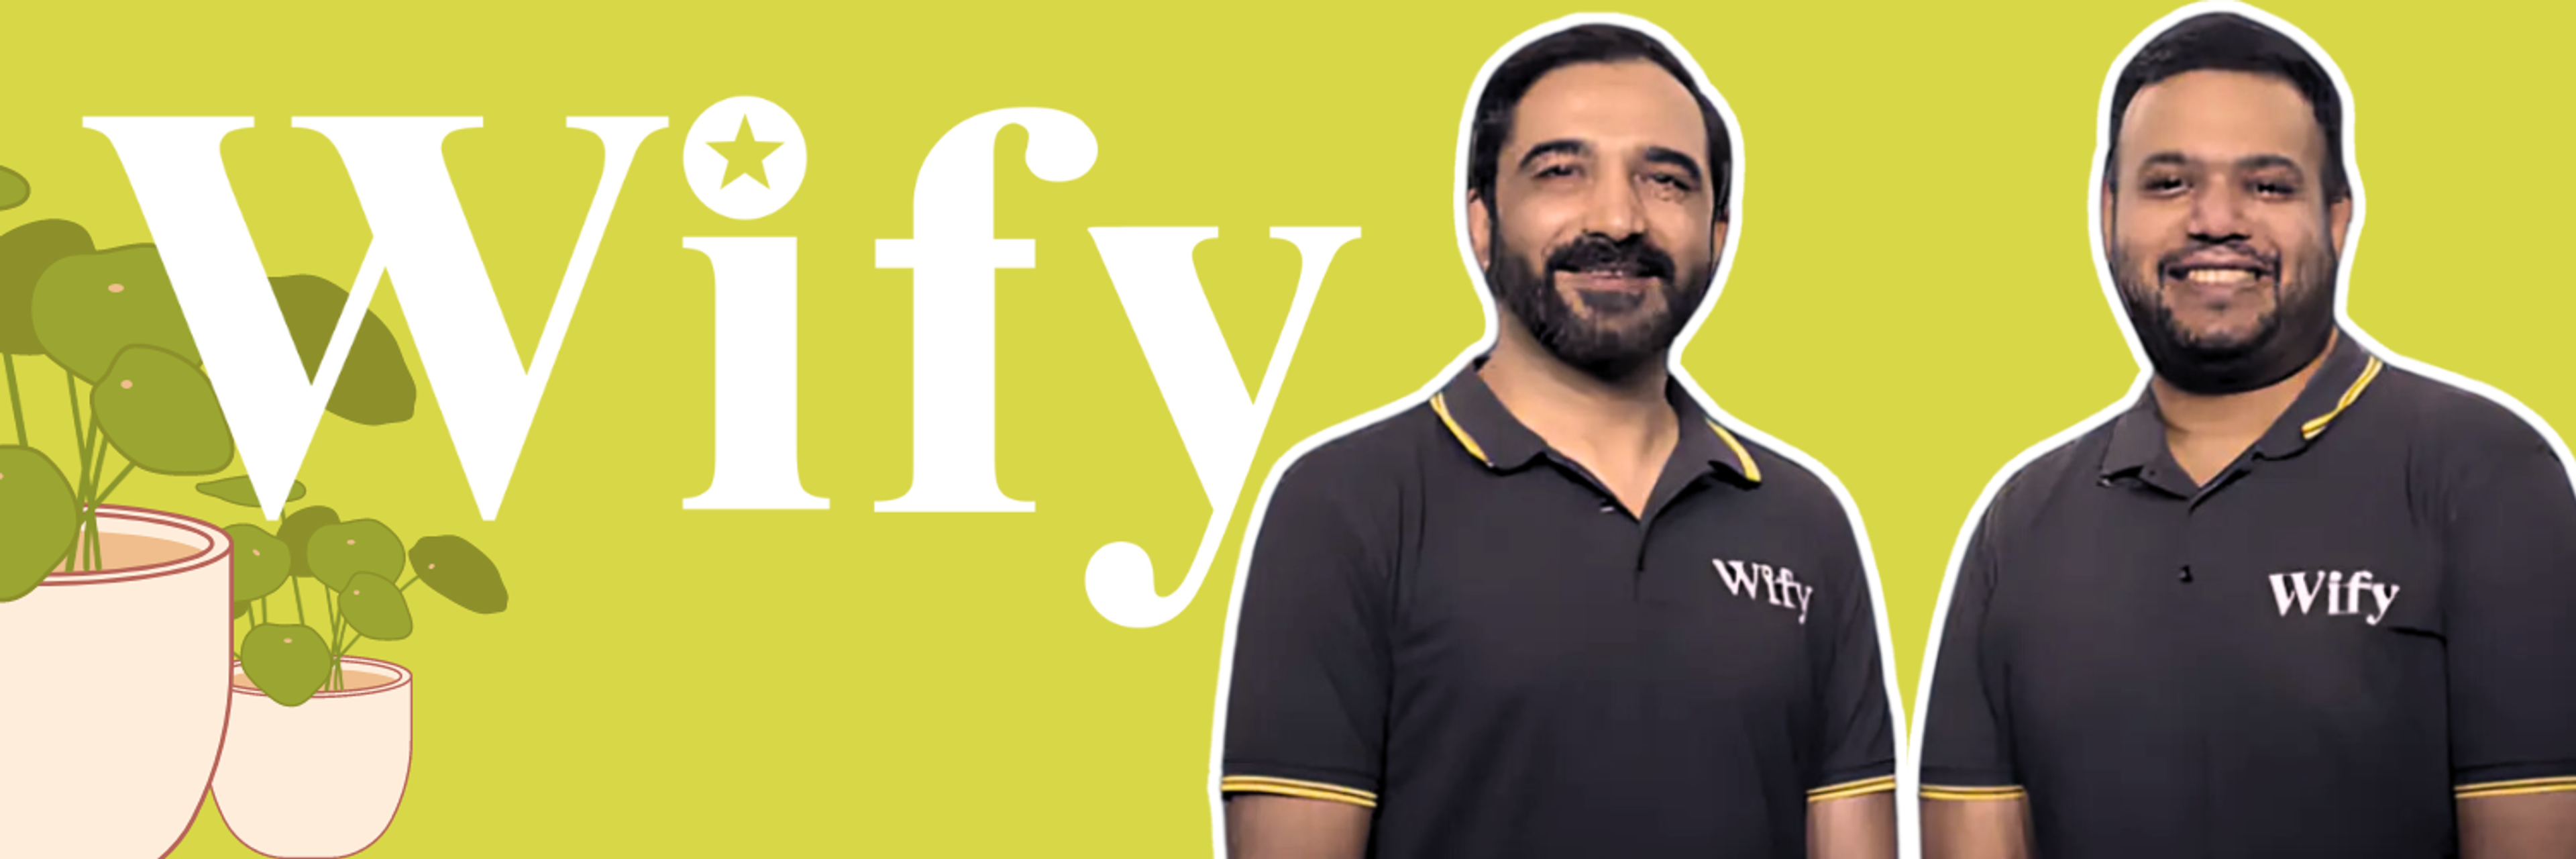  The image features a promotional banner for Wify, a home furnishing installation startup. The background is a vibrant lime green, and prominently displayed in the center is the company's logo "Wify" in white with a decorative flourish under the "f." On the right side of the image, there are two individuals, presumably co-founders, wearing black polo shirts with the Wify logo. They are smiling and appear confident. Additionally, there are illustrations of two potted plants in the bottom left corner, adding a touch of nature to the design. The overall composition highlights the brand's friendly and professional image.